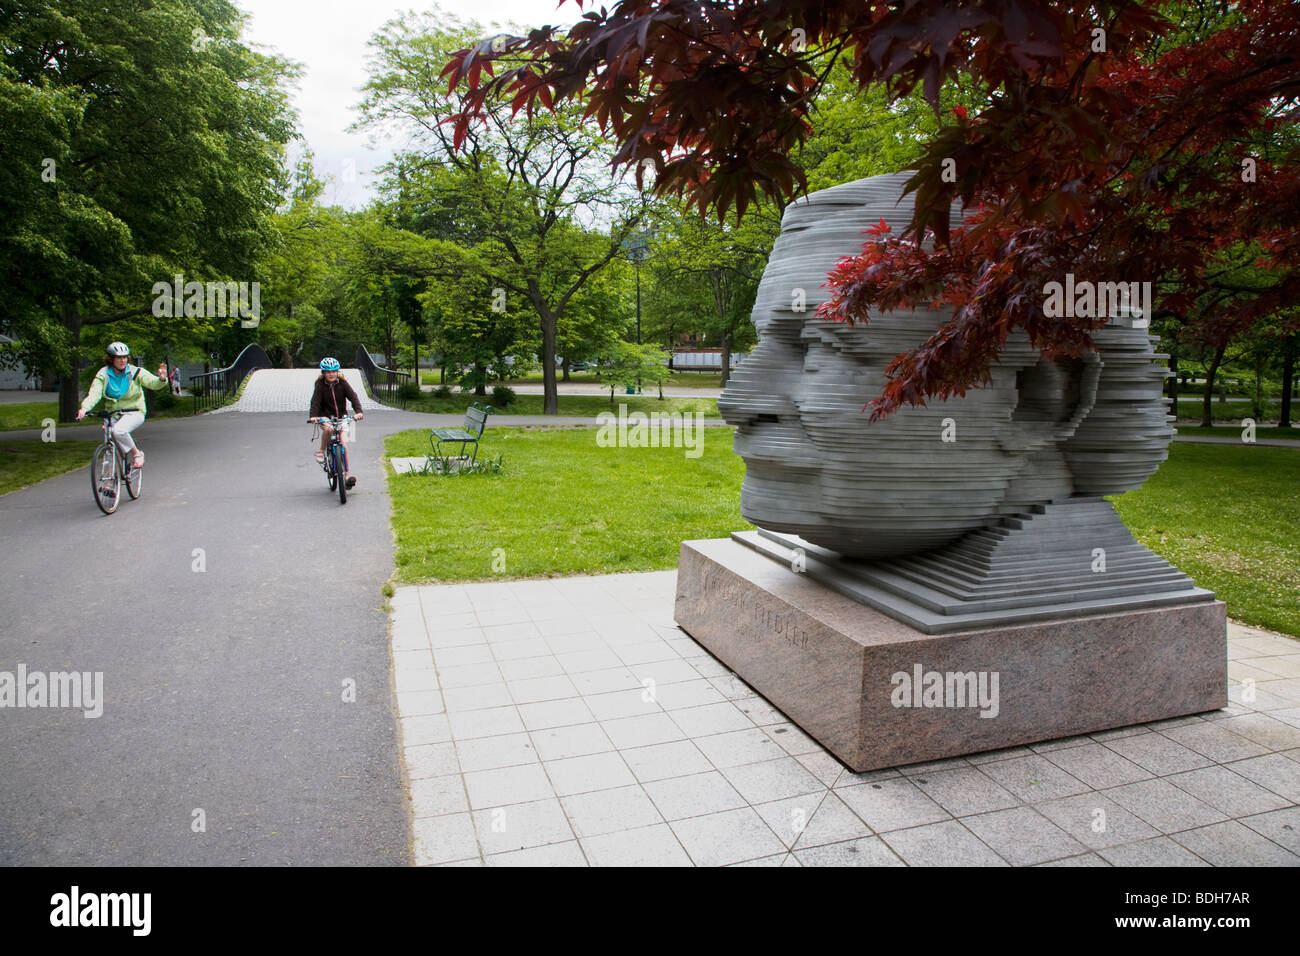 Bicyclists pass a statue of ARTHUR FIEDLER the conductor of the Boston Pops in CHARLES RIVER PARK - BOSTON, MASSACHUSETTS Stock Photo